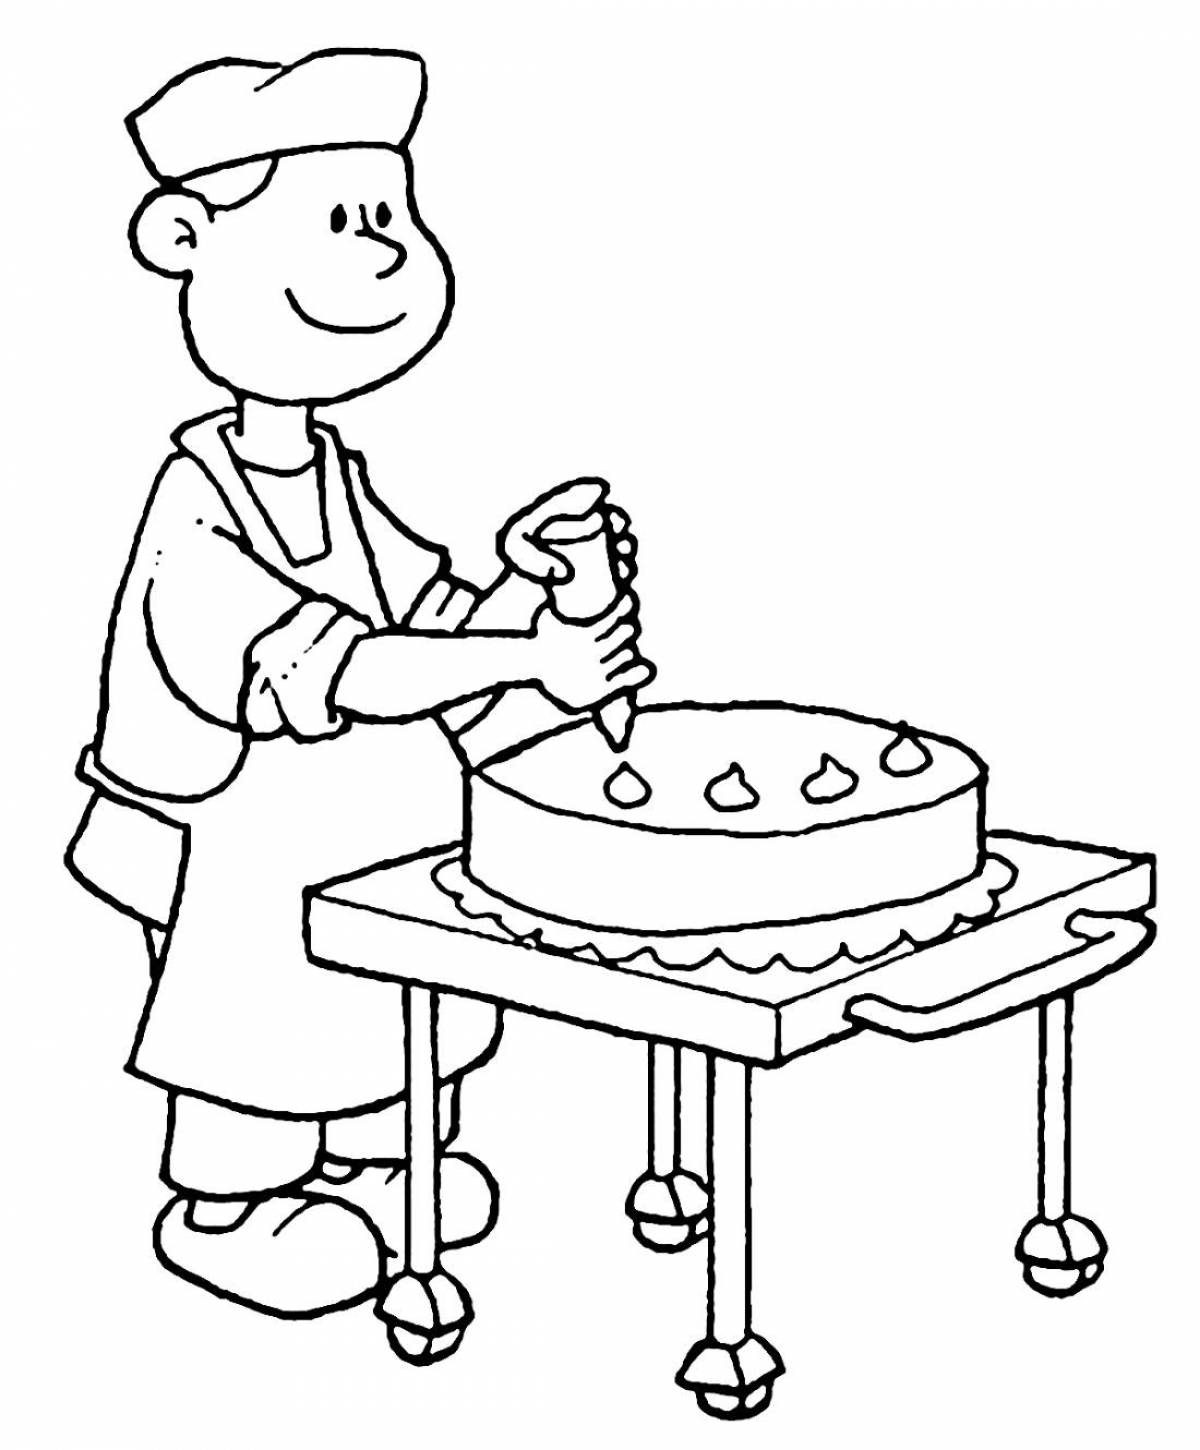 Entertaining coloring pages of professions for children 6-7 years old